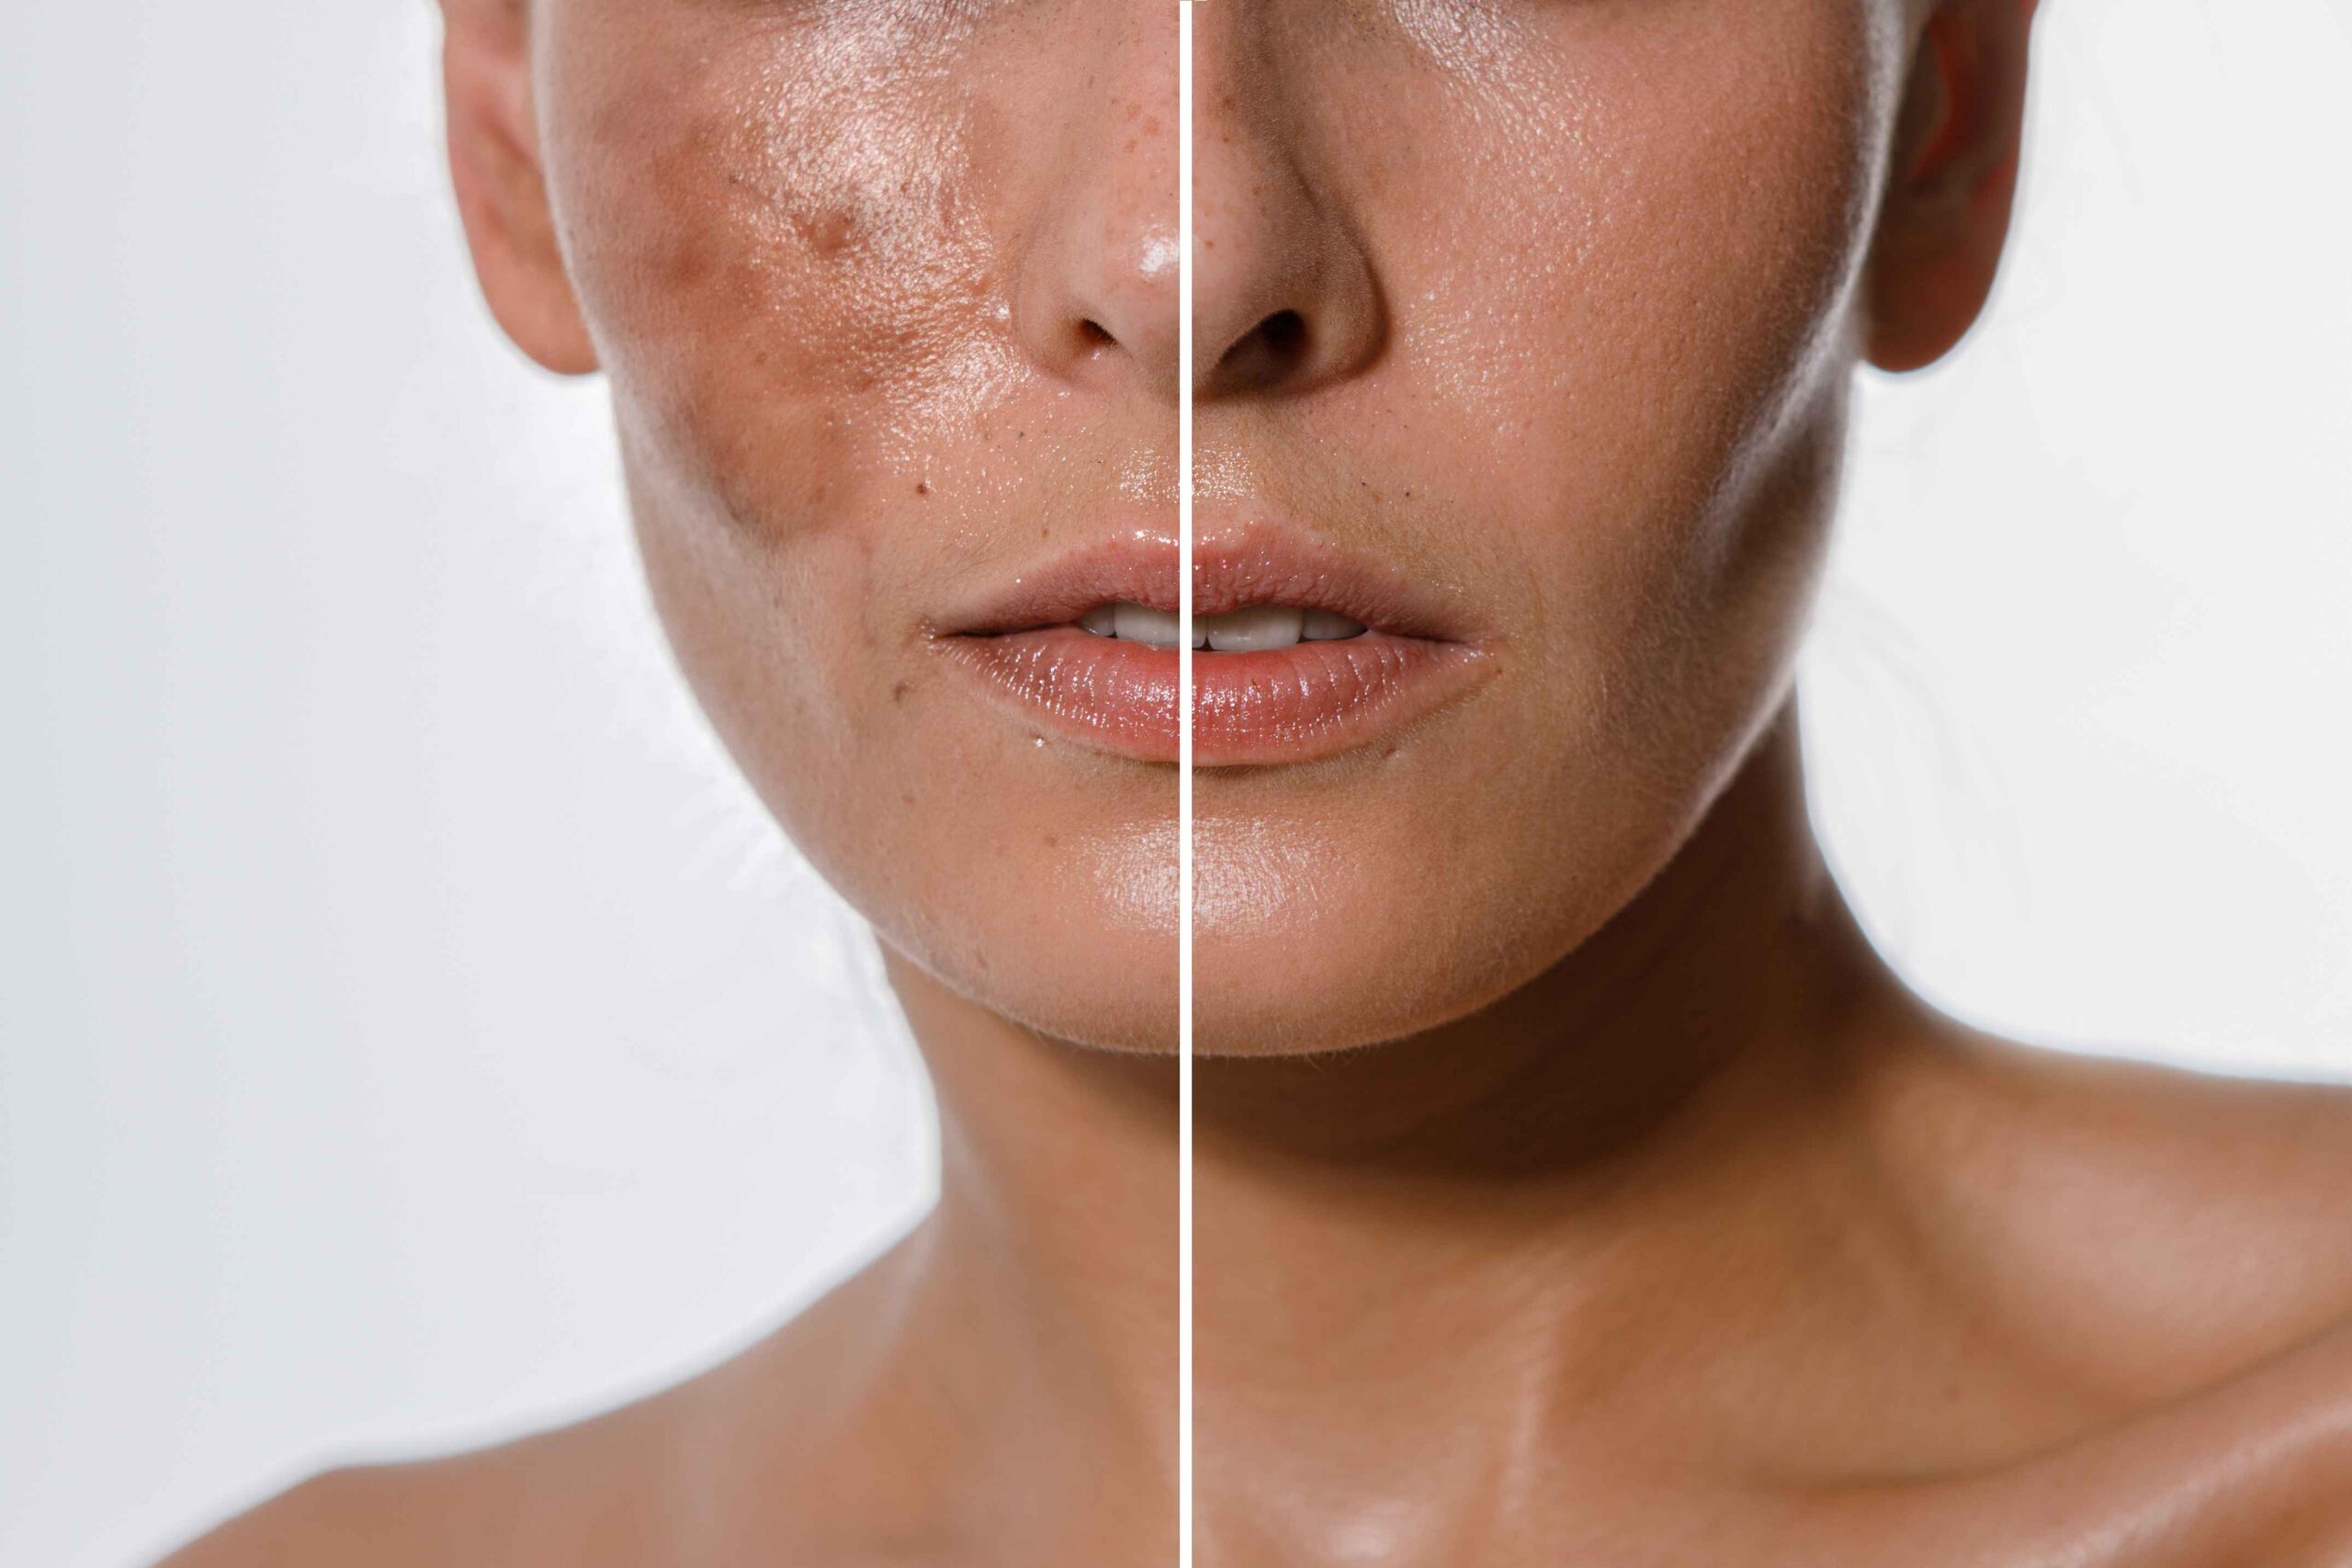 Treating Acne Scars | New Look Skin Center Medical Spa in Glendale, Encino and Irvine, CA